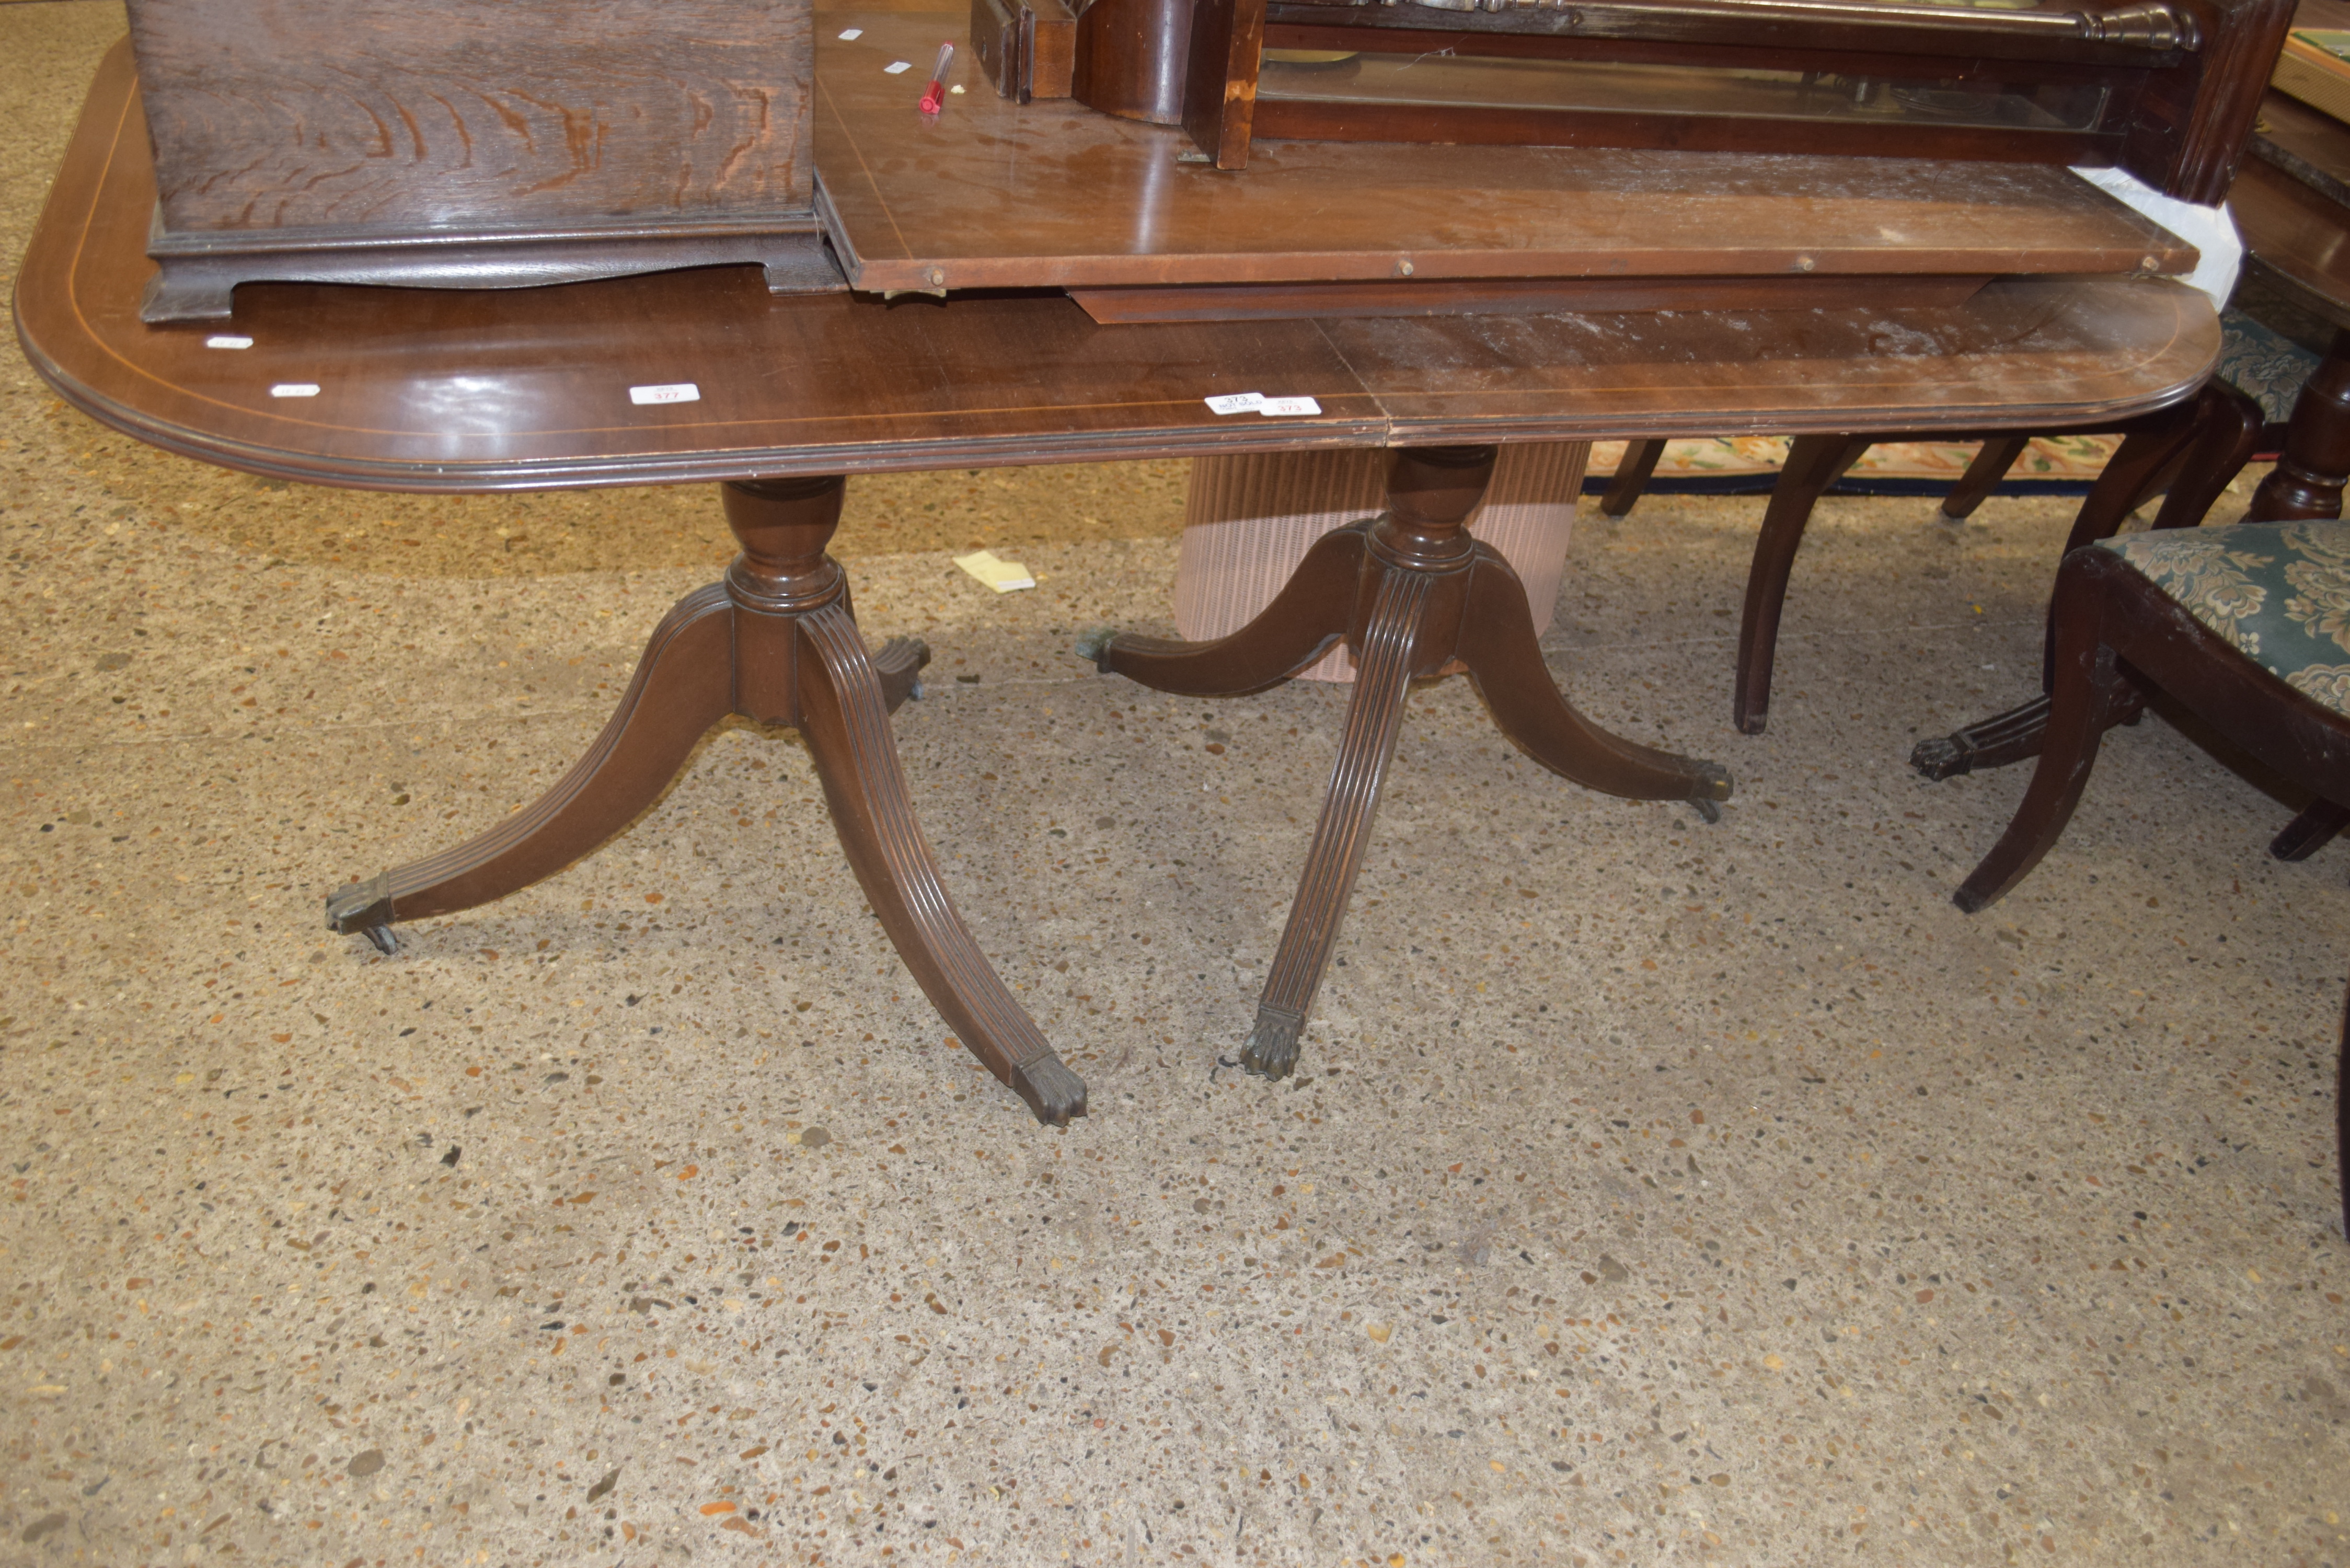 REPRODUCTION MAHOGANY TWIN PEDESTAL DINING TABLE WITH EXTENSION LEAF, 162CM WIDE UNEXTENDED